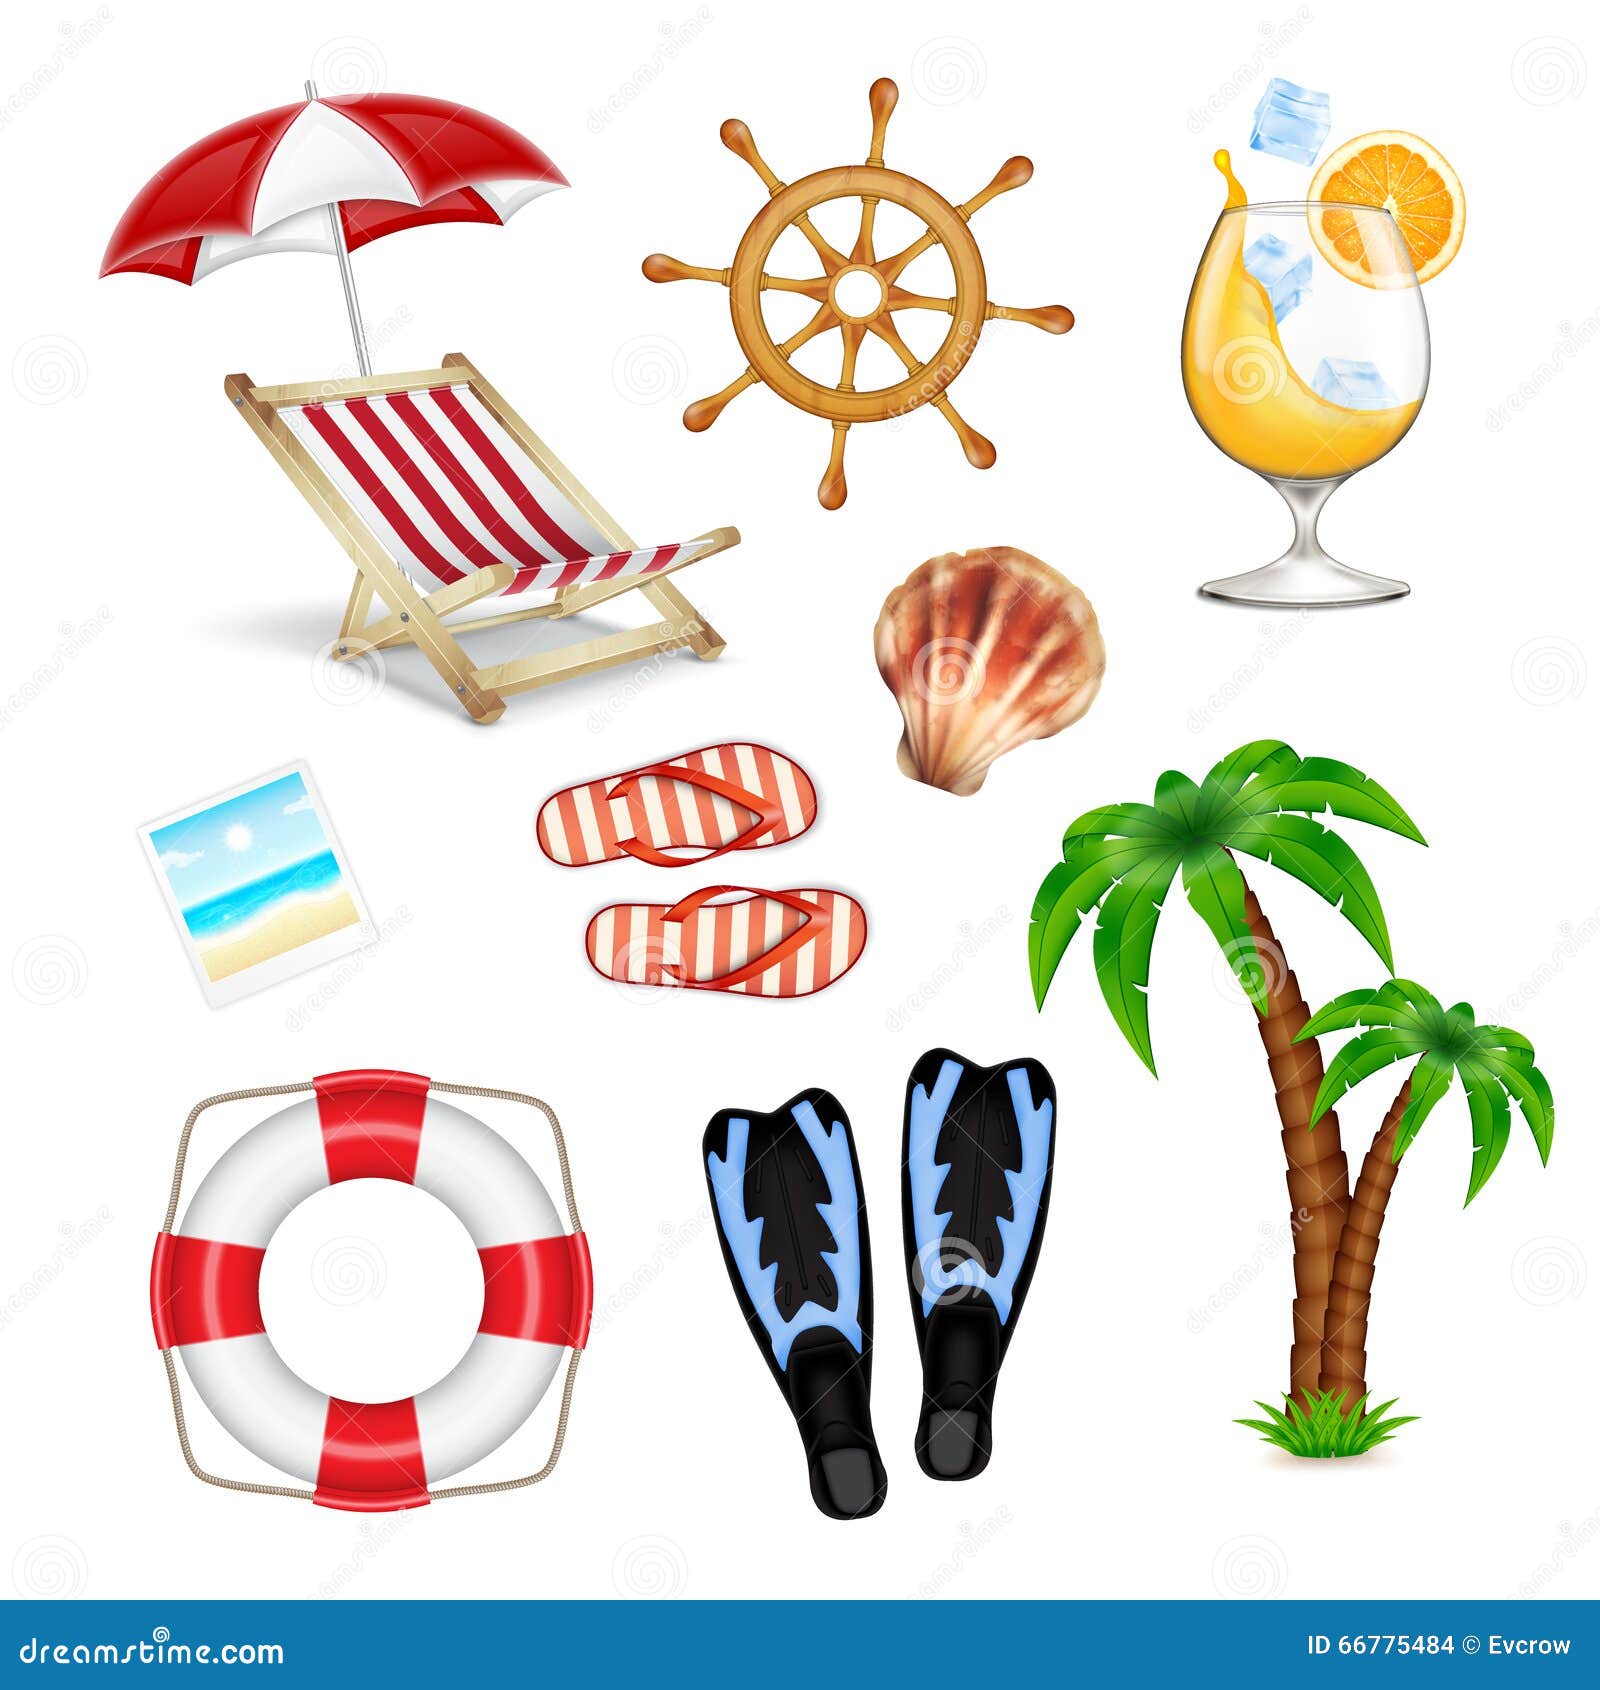 Summer vacation icons stock vector. Illustration of design - 66775484